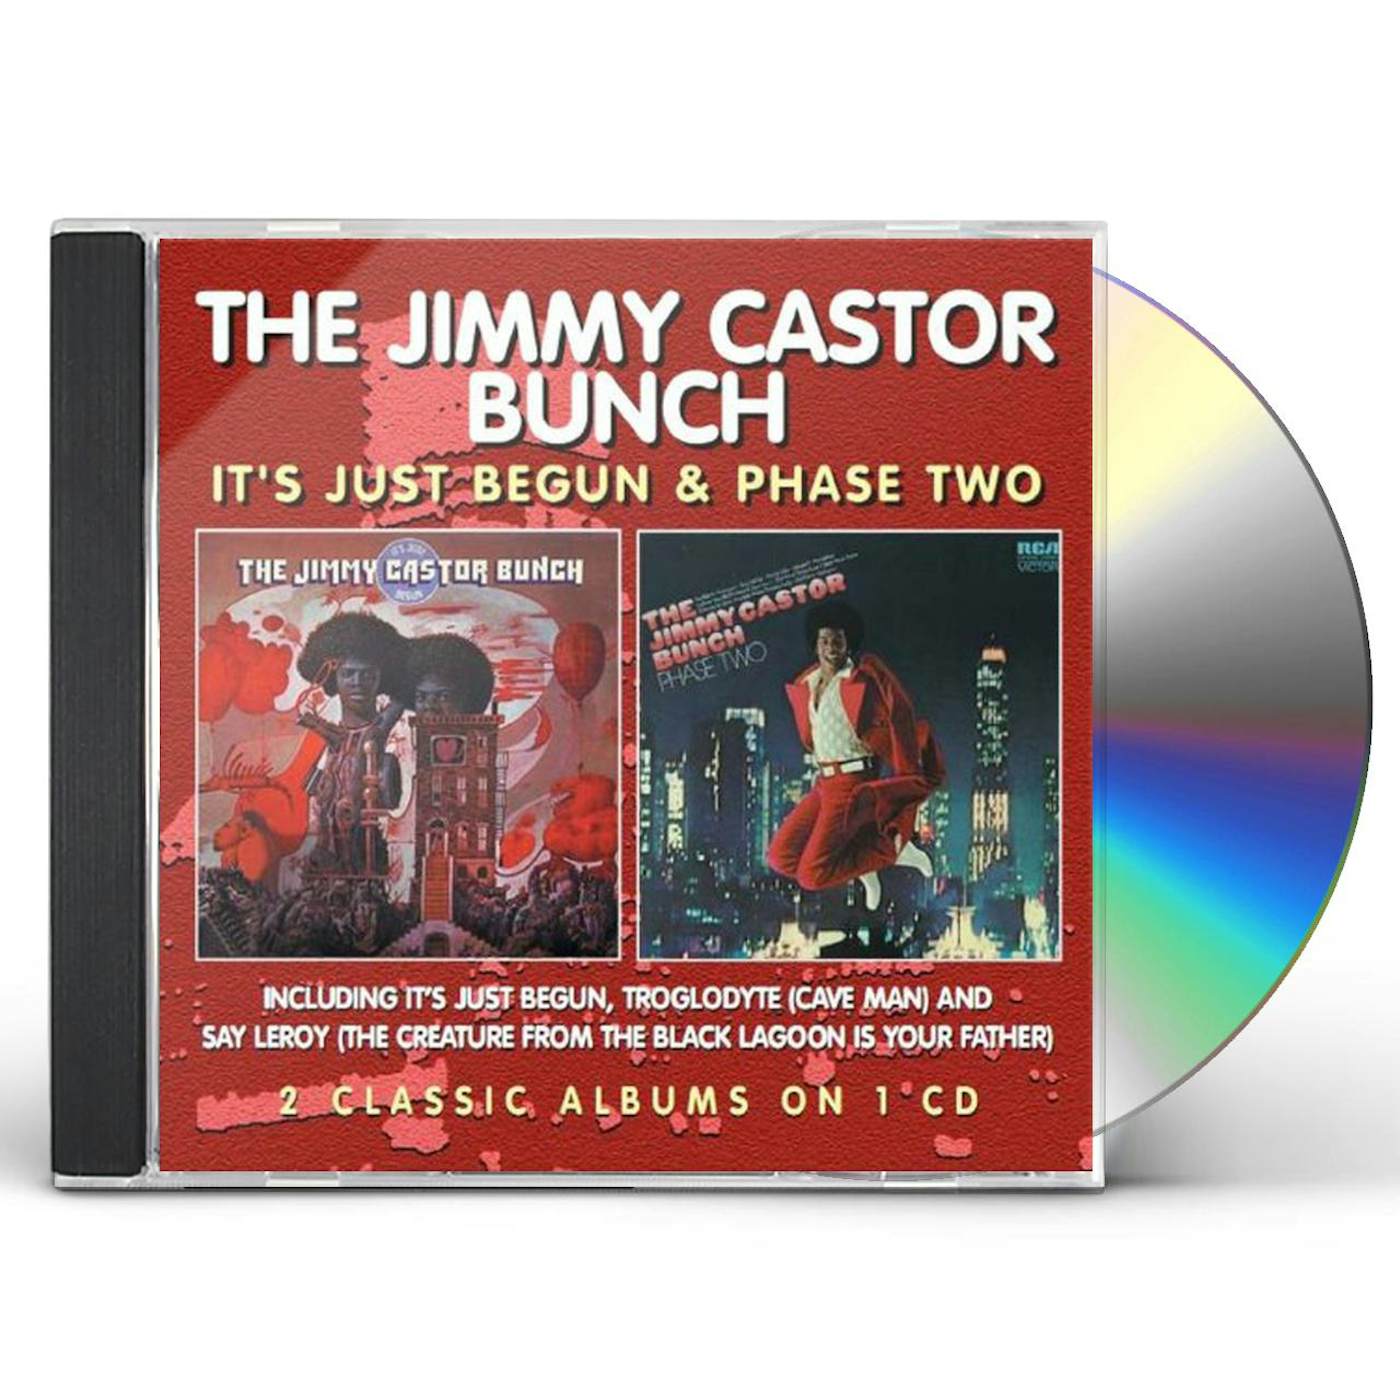 The Jimmy Castor Bunch IT'S JUST BEGUN/PHASE TWO CD